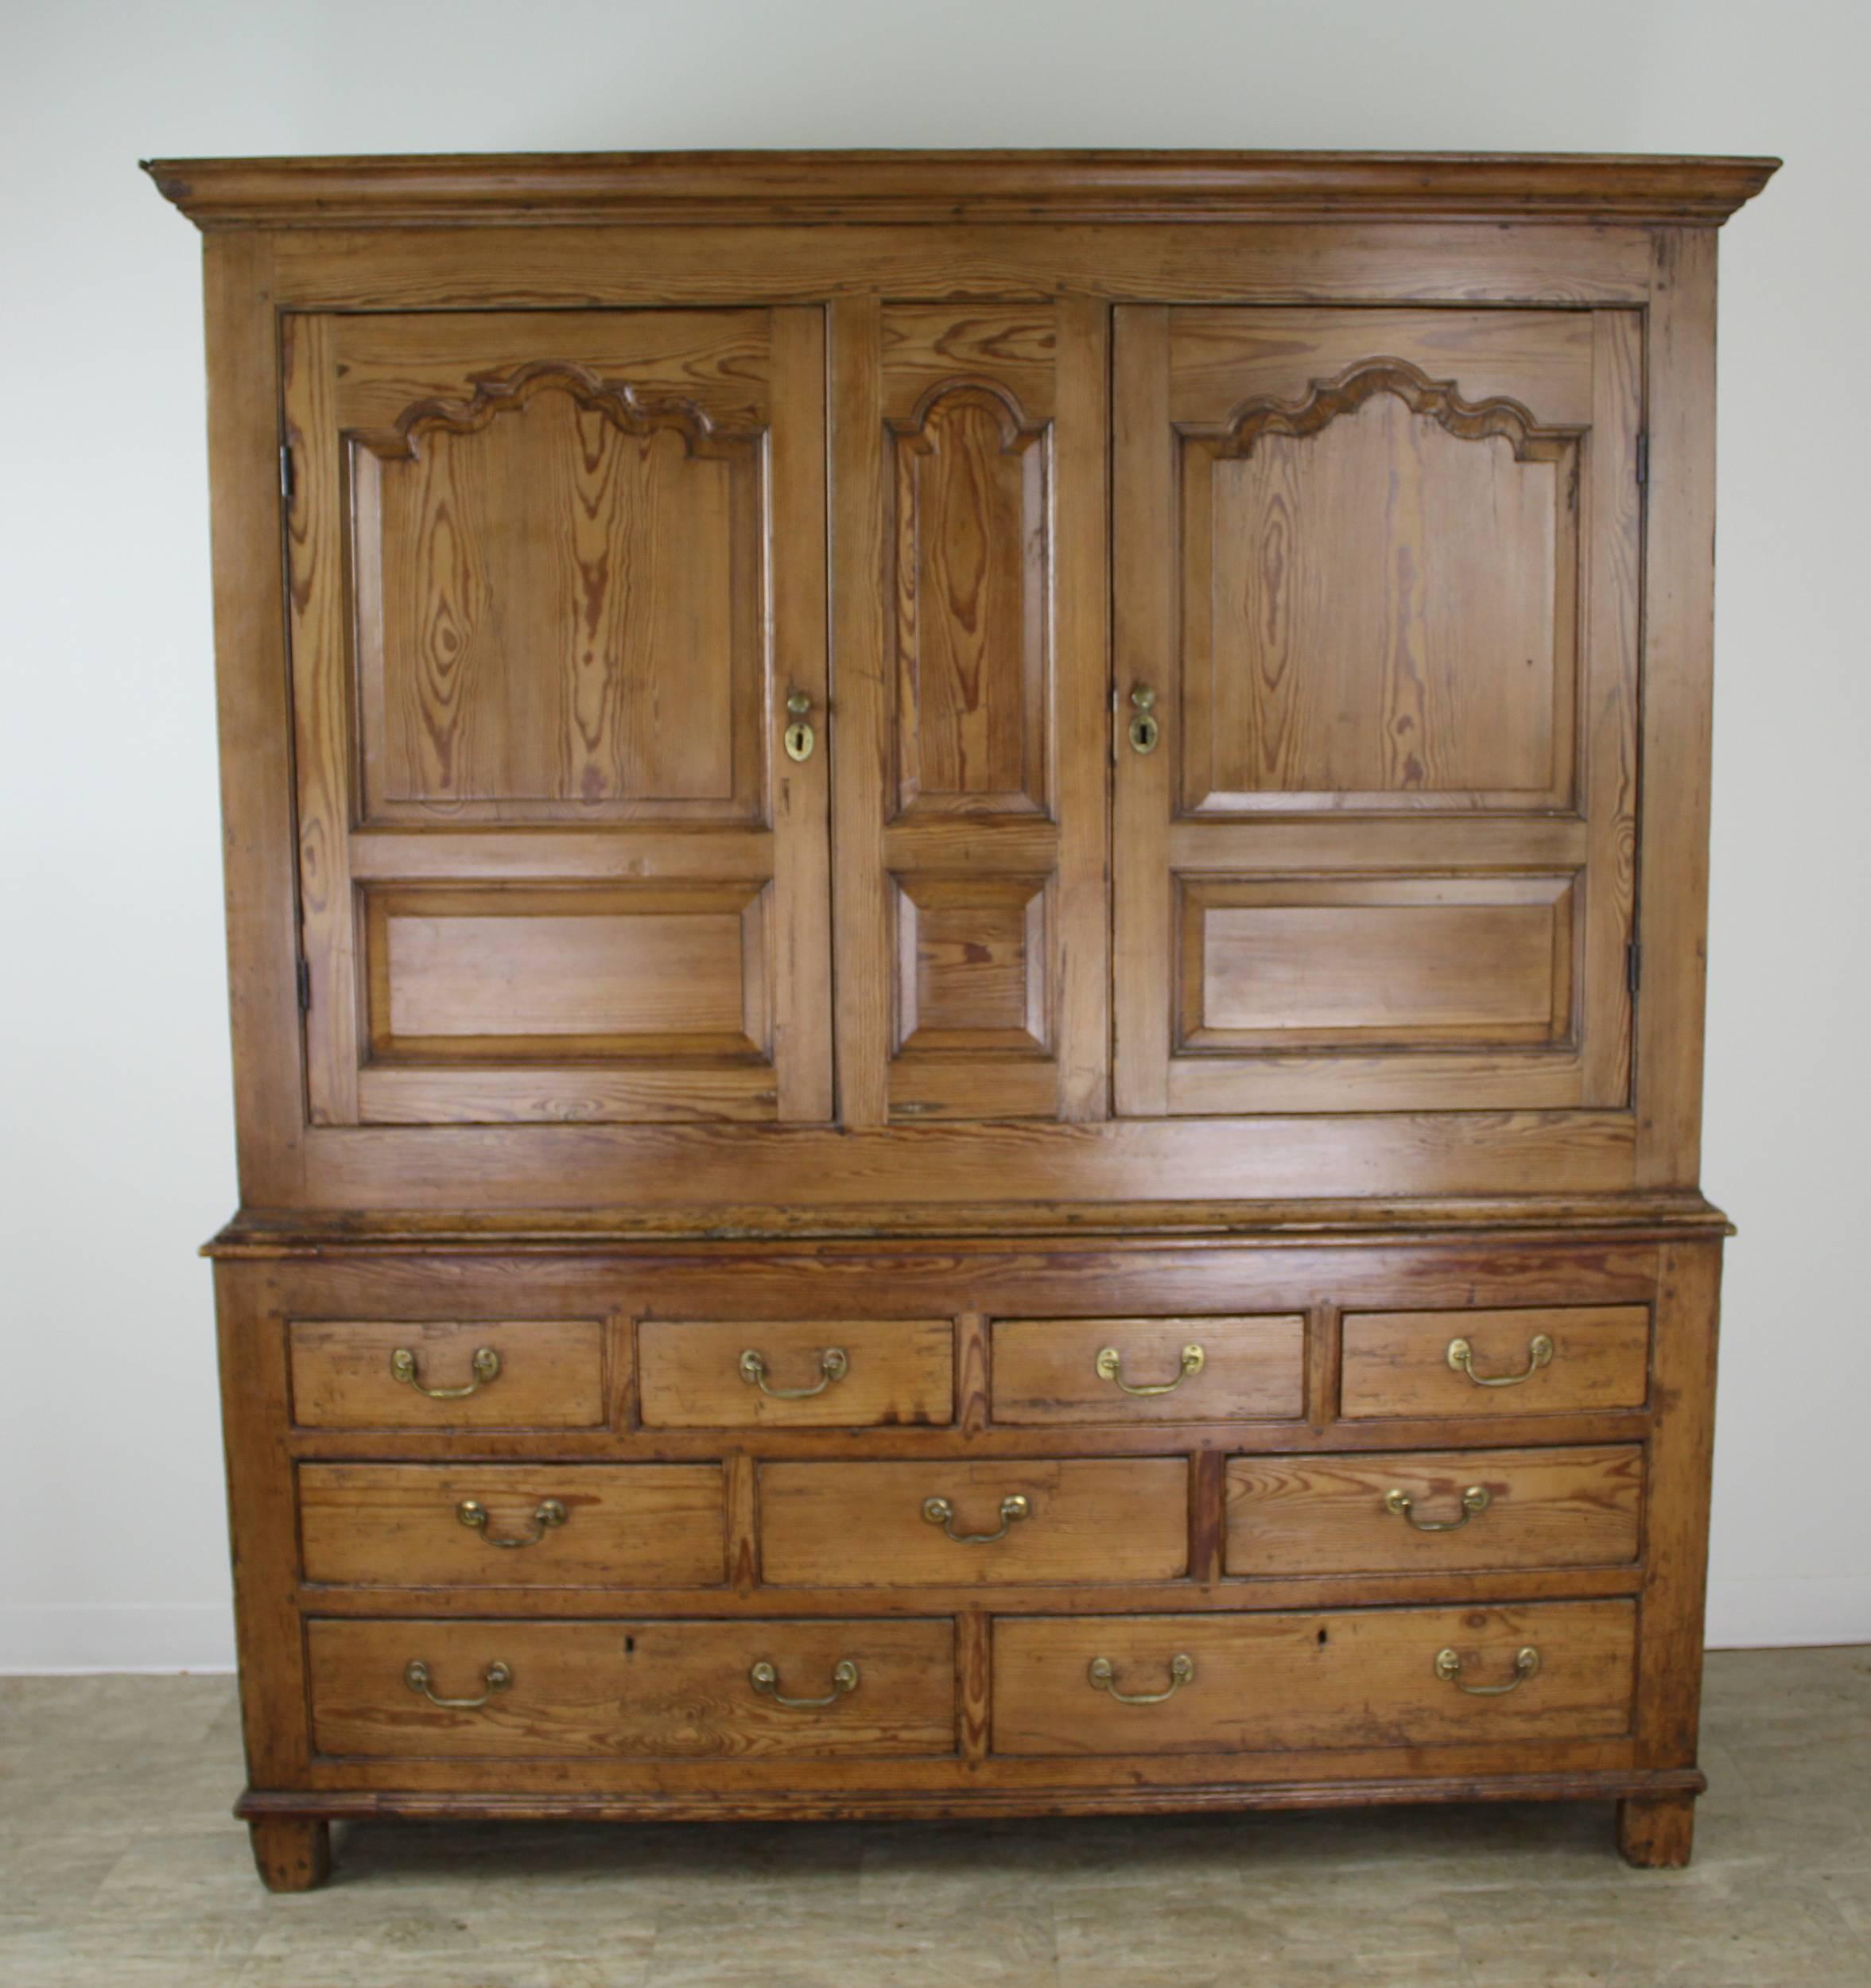 A gorgeous antique Welsh linen cupboard or wardrobe in honeyed pine with good textured grain. Features include crowd molding at the top and centre, inset panels on the sides, and four-over-three-over-two-drawer construction. The interior of the